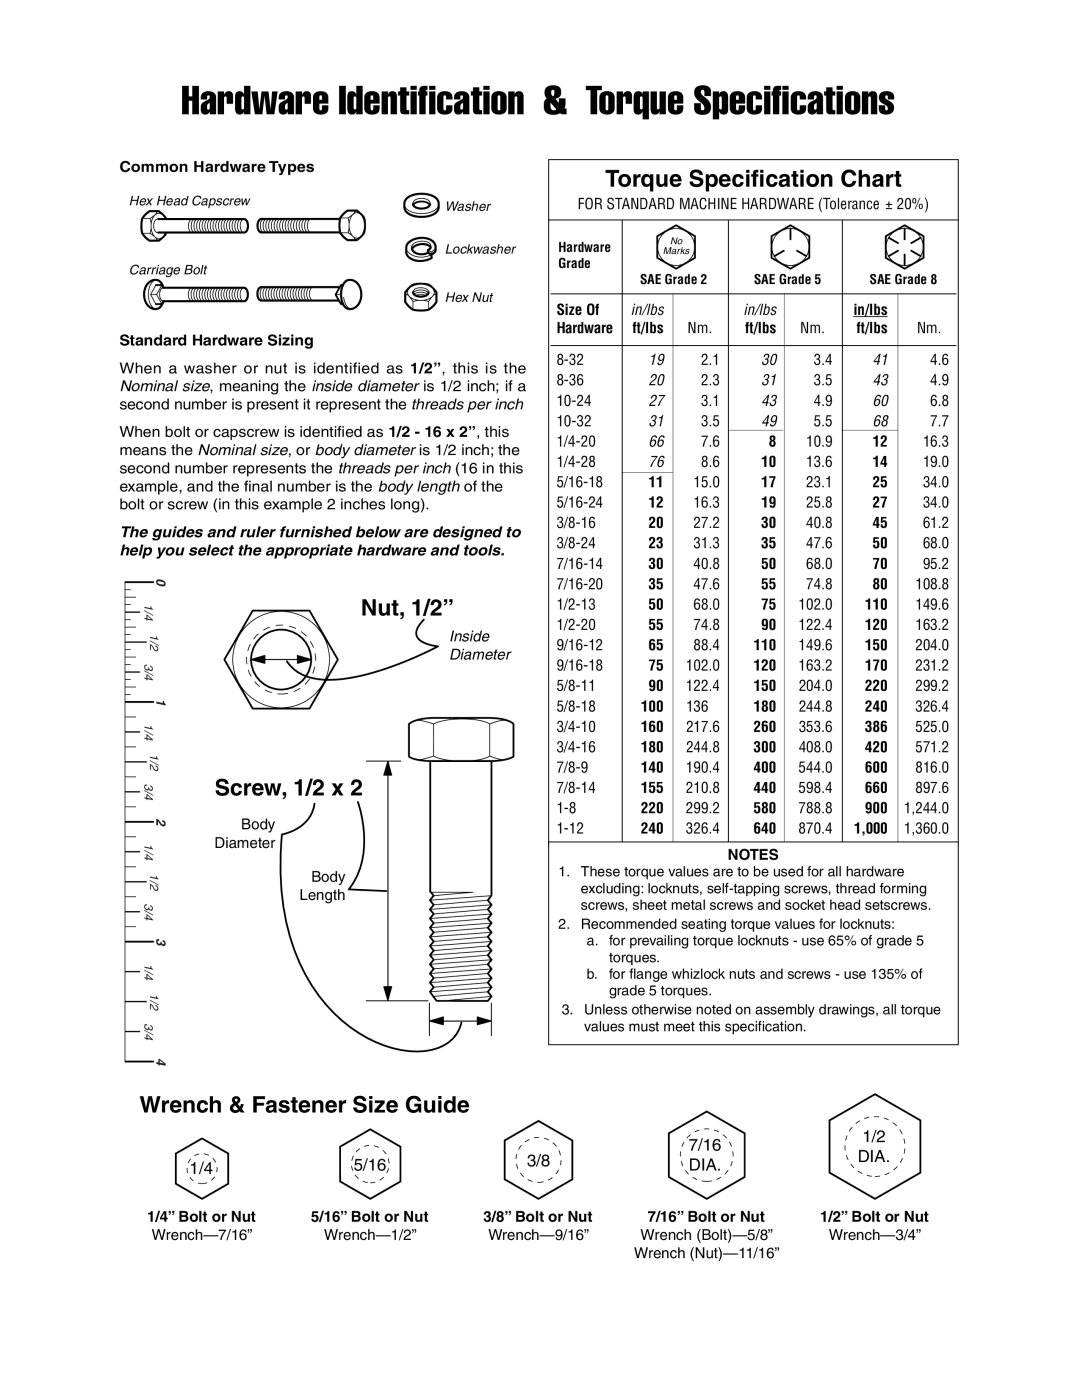 Simplicity 1696334 Wrench & Fastener Size Guide, 7/16, 5/16, Hardware Identification & Torque Specifications, Nut, 1/2” 